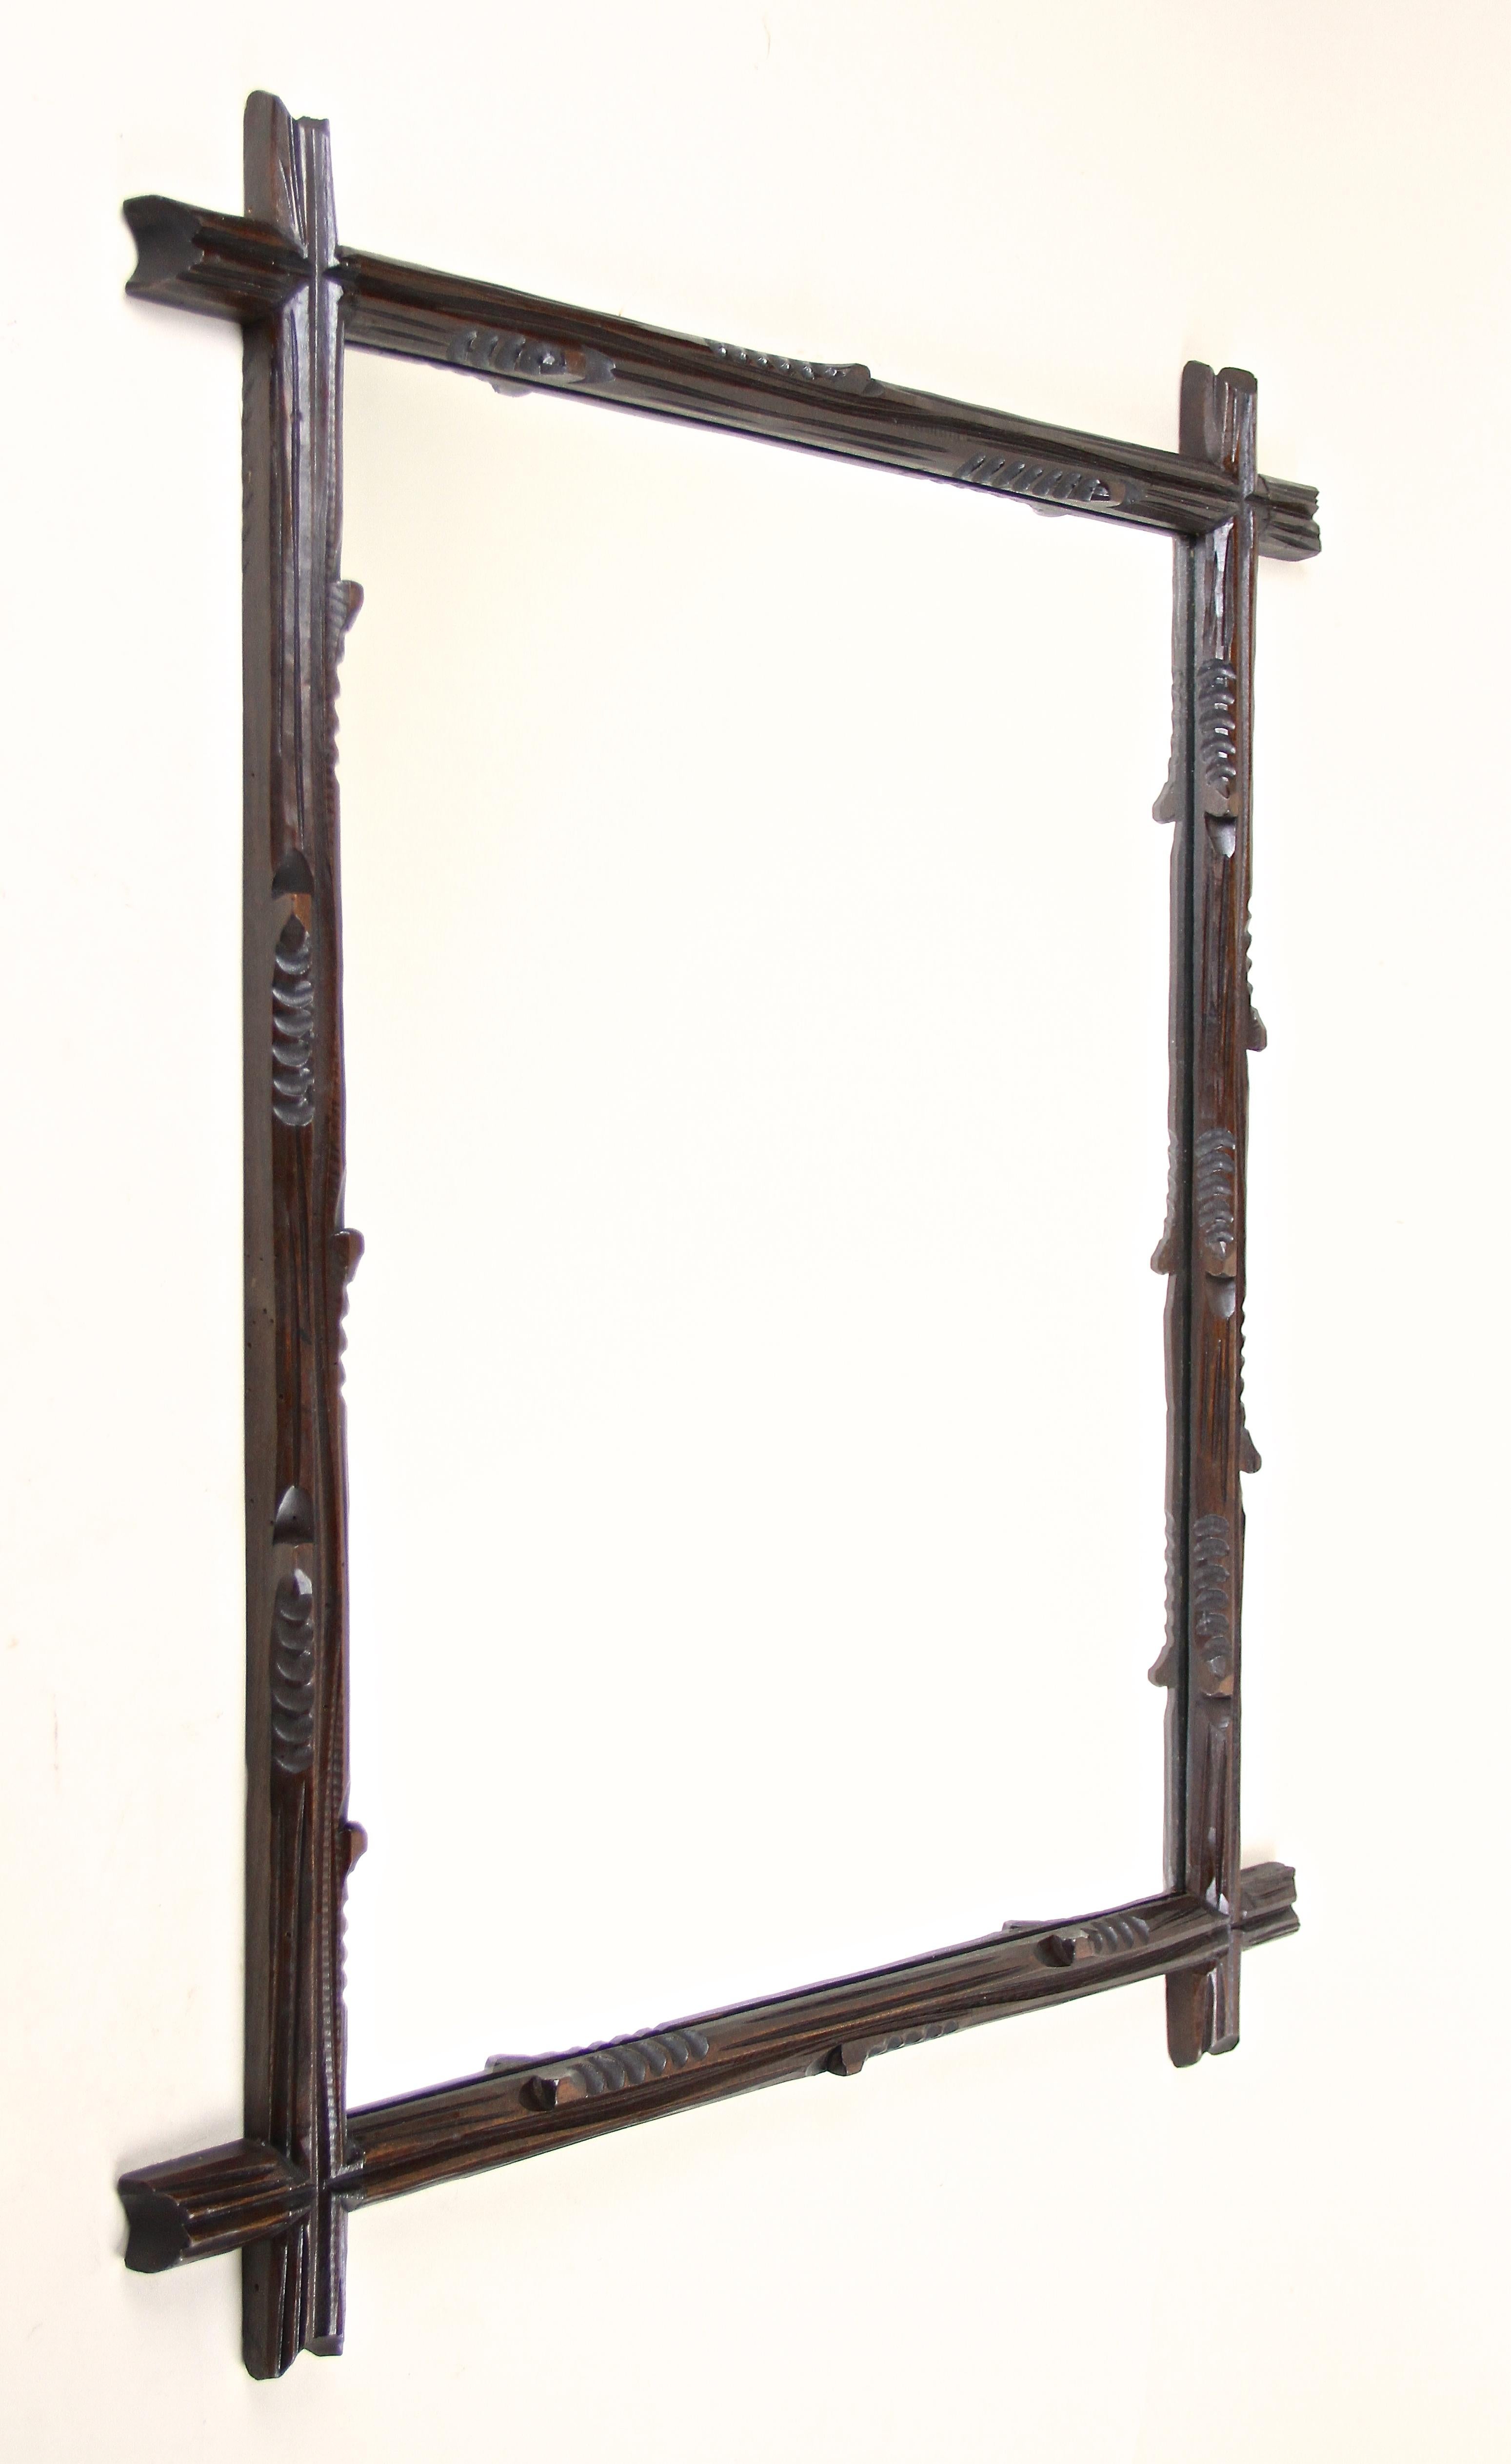 Very decorative rural Black Forest wall mirror from the late 19th century from circa 1890 in Austria. The beautiful hand carved frame impresses with an unusual 